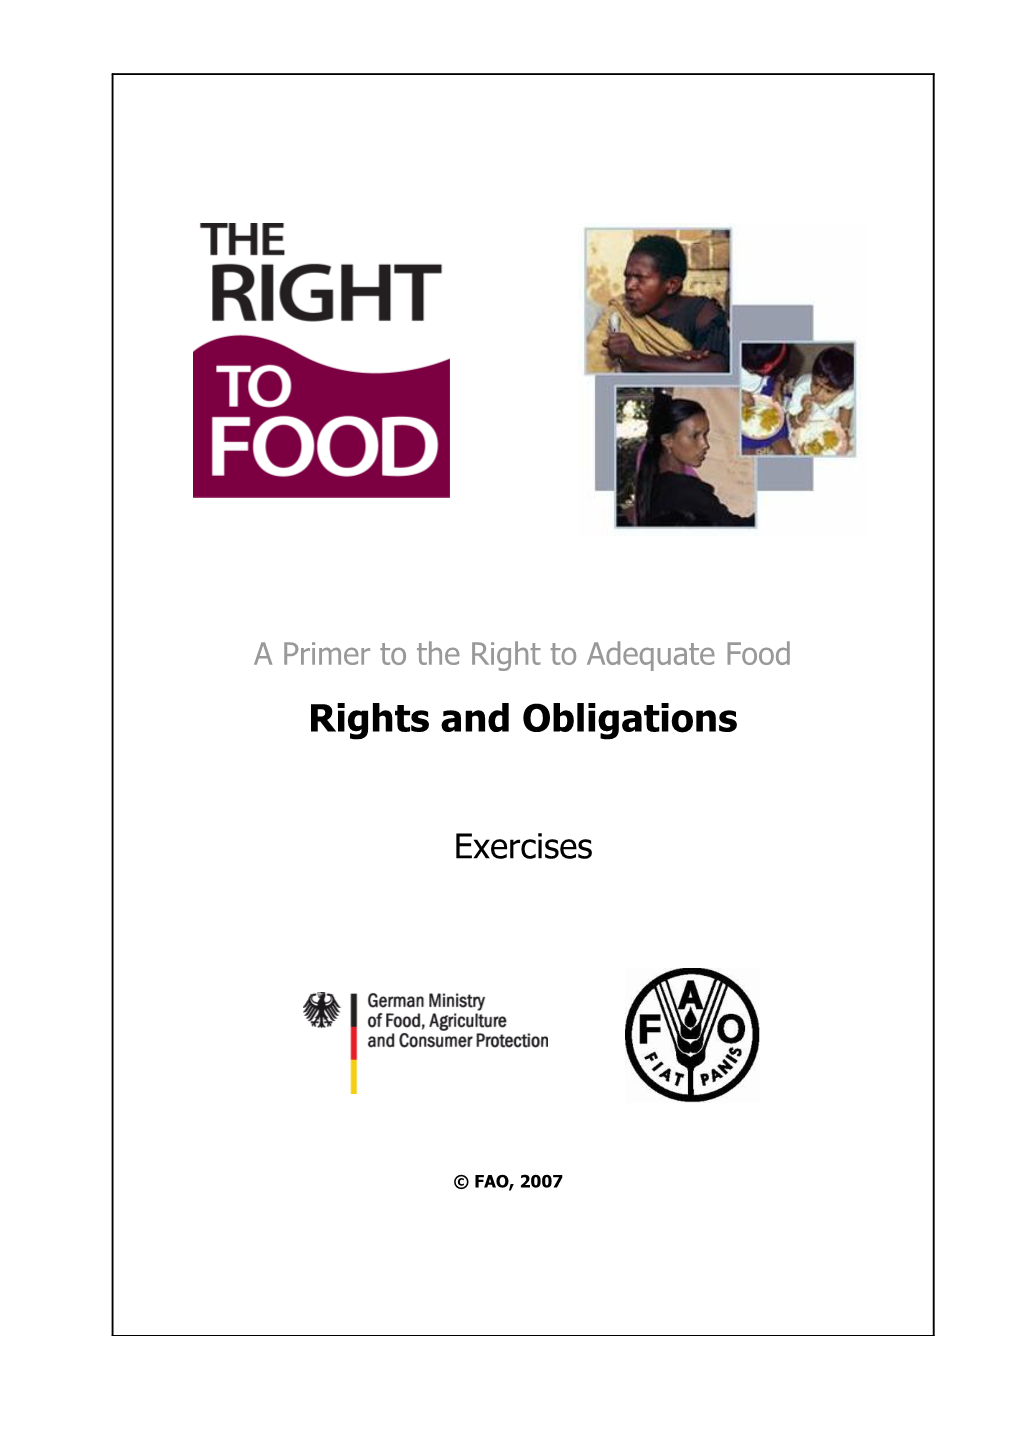 A Primer to the Right to Adequate Food -Rights and Obligations. Exercises